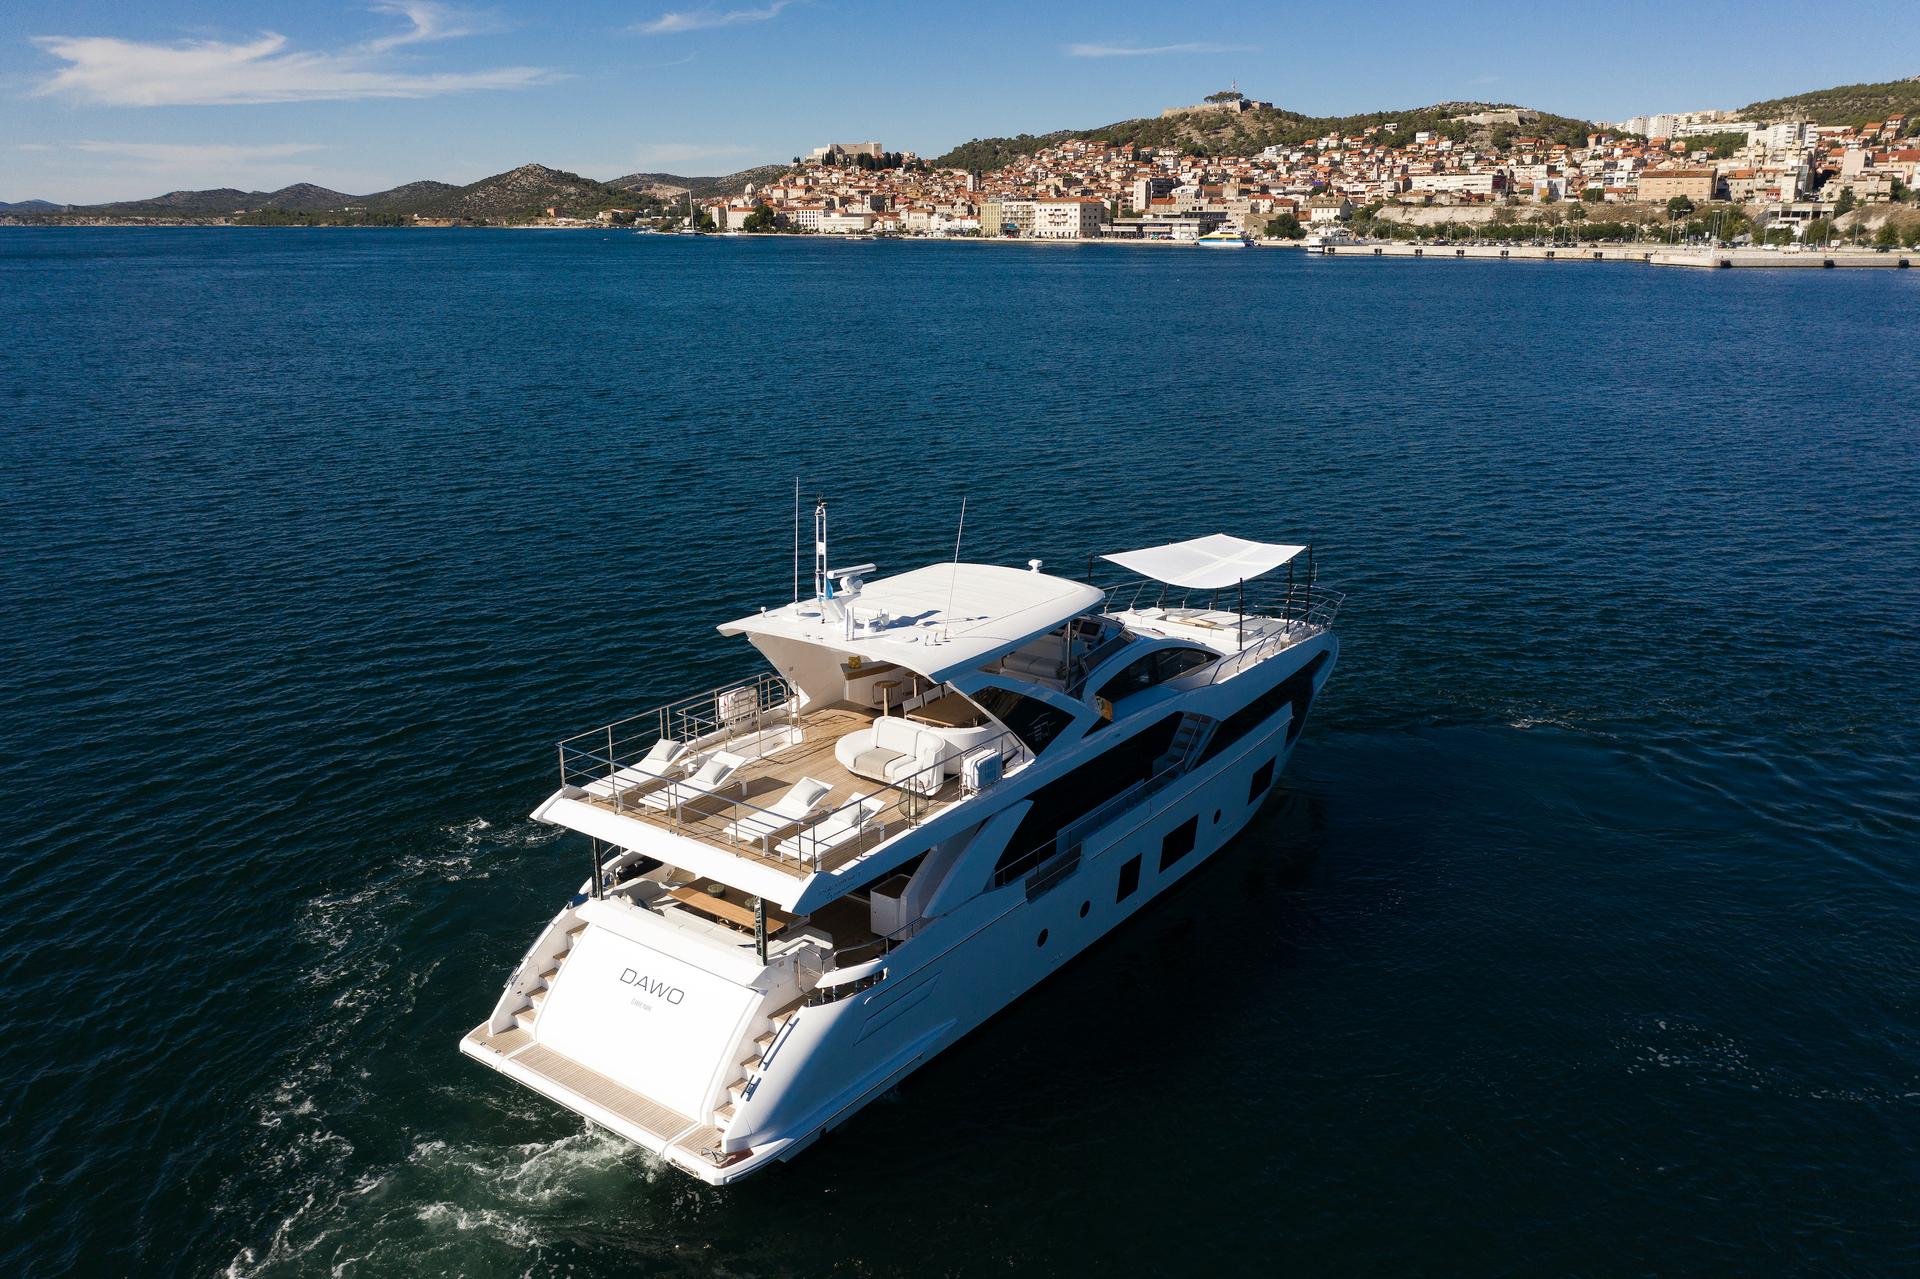 Dawo brand new 27m Azimut yacht charter in Croatia with TV Salon, High speed internet & beautiful ensuite cabins - High Point Yachting